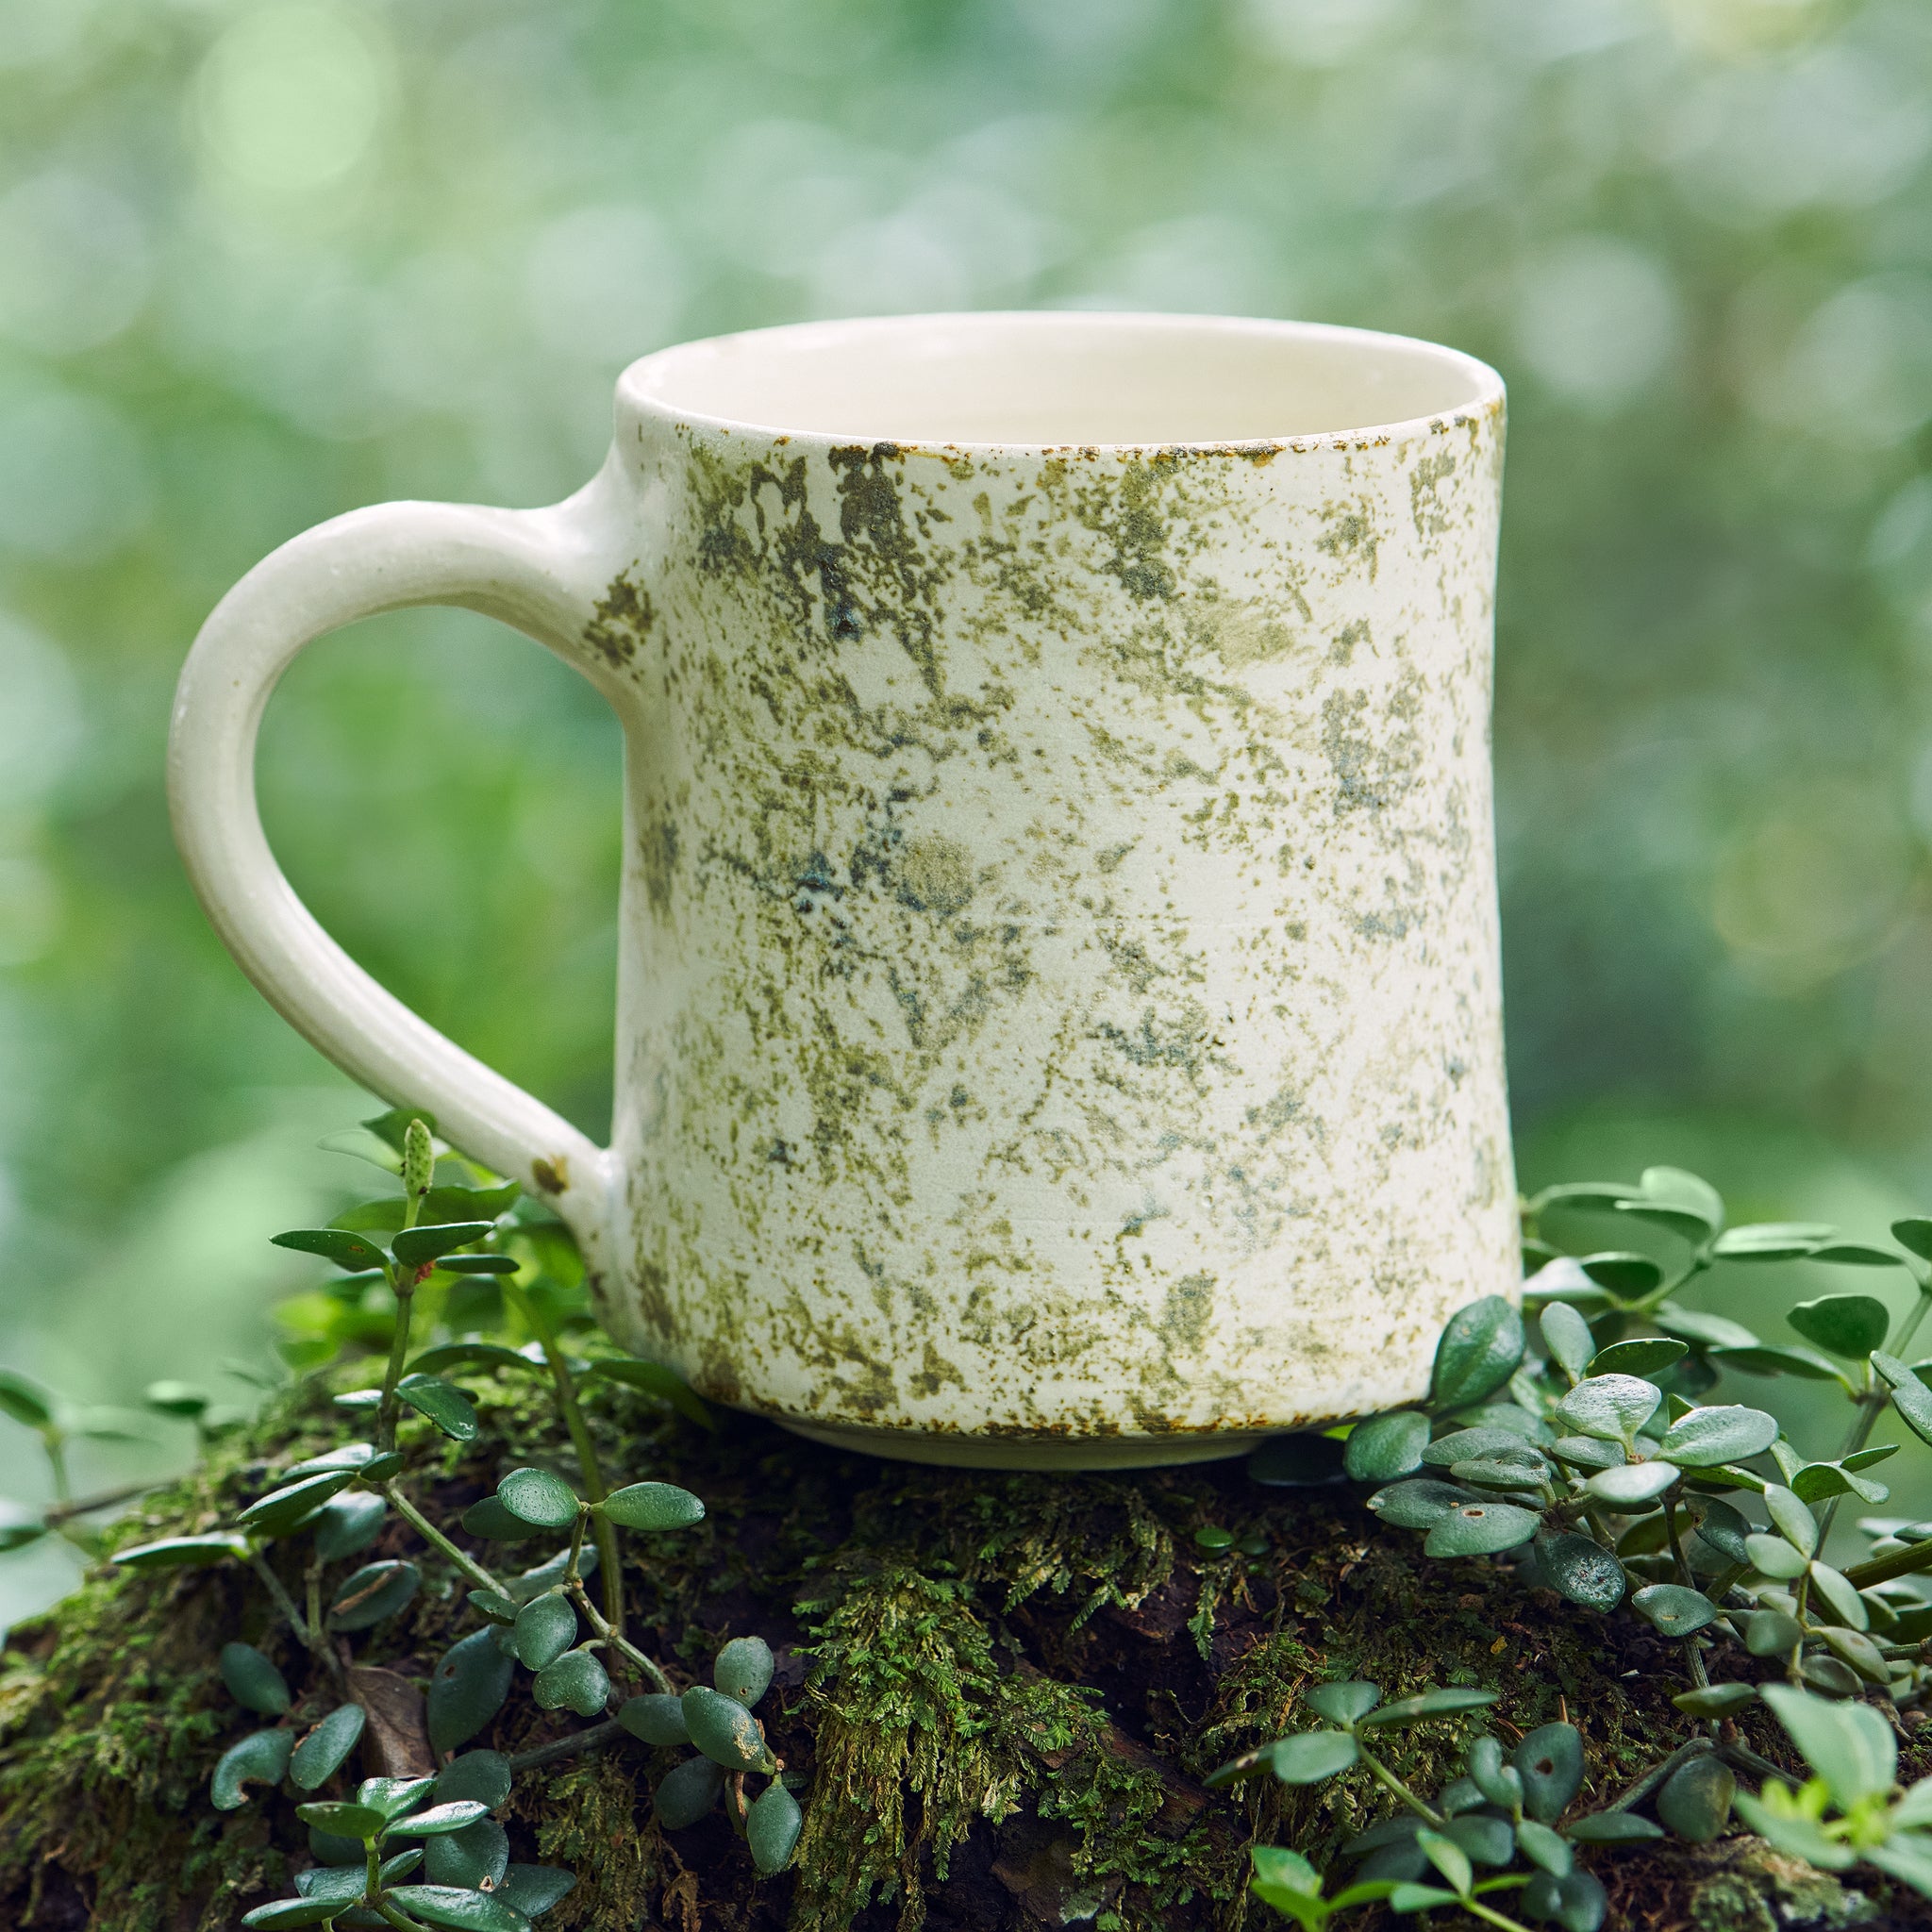 The Aged Moss Cup